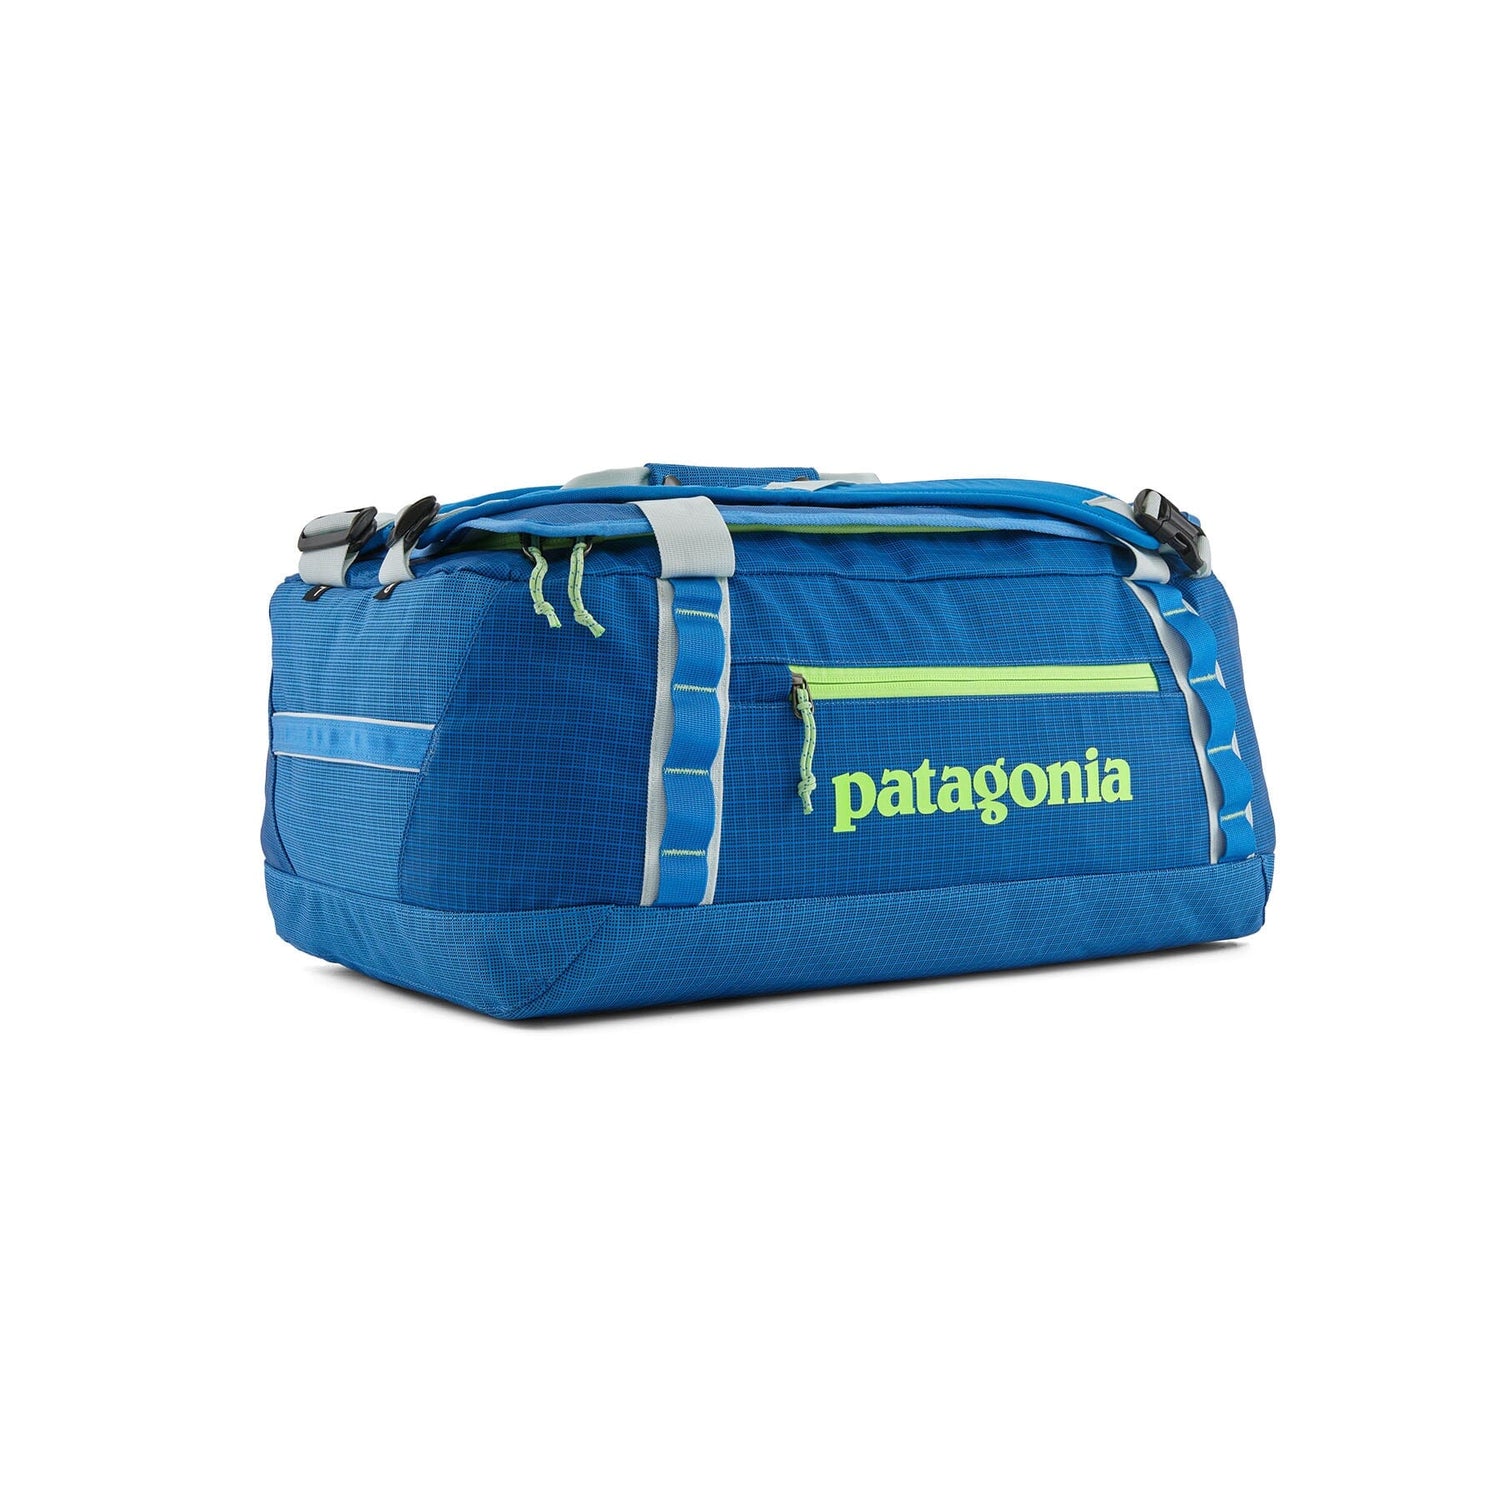 Patagonia - Black Hole Duffel 40L - 100% postconsumer recycled polyester - Weekendbee - sustainable sportswear